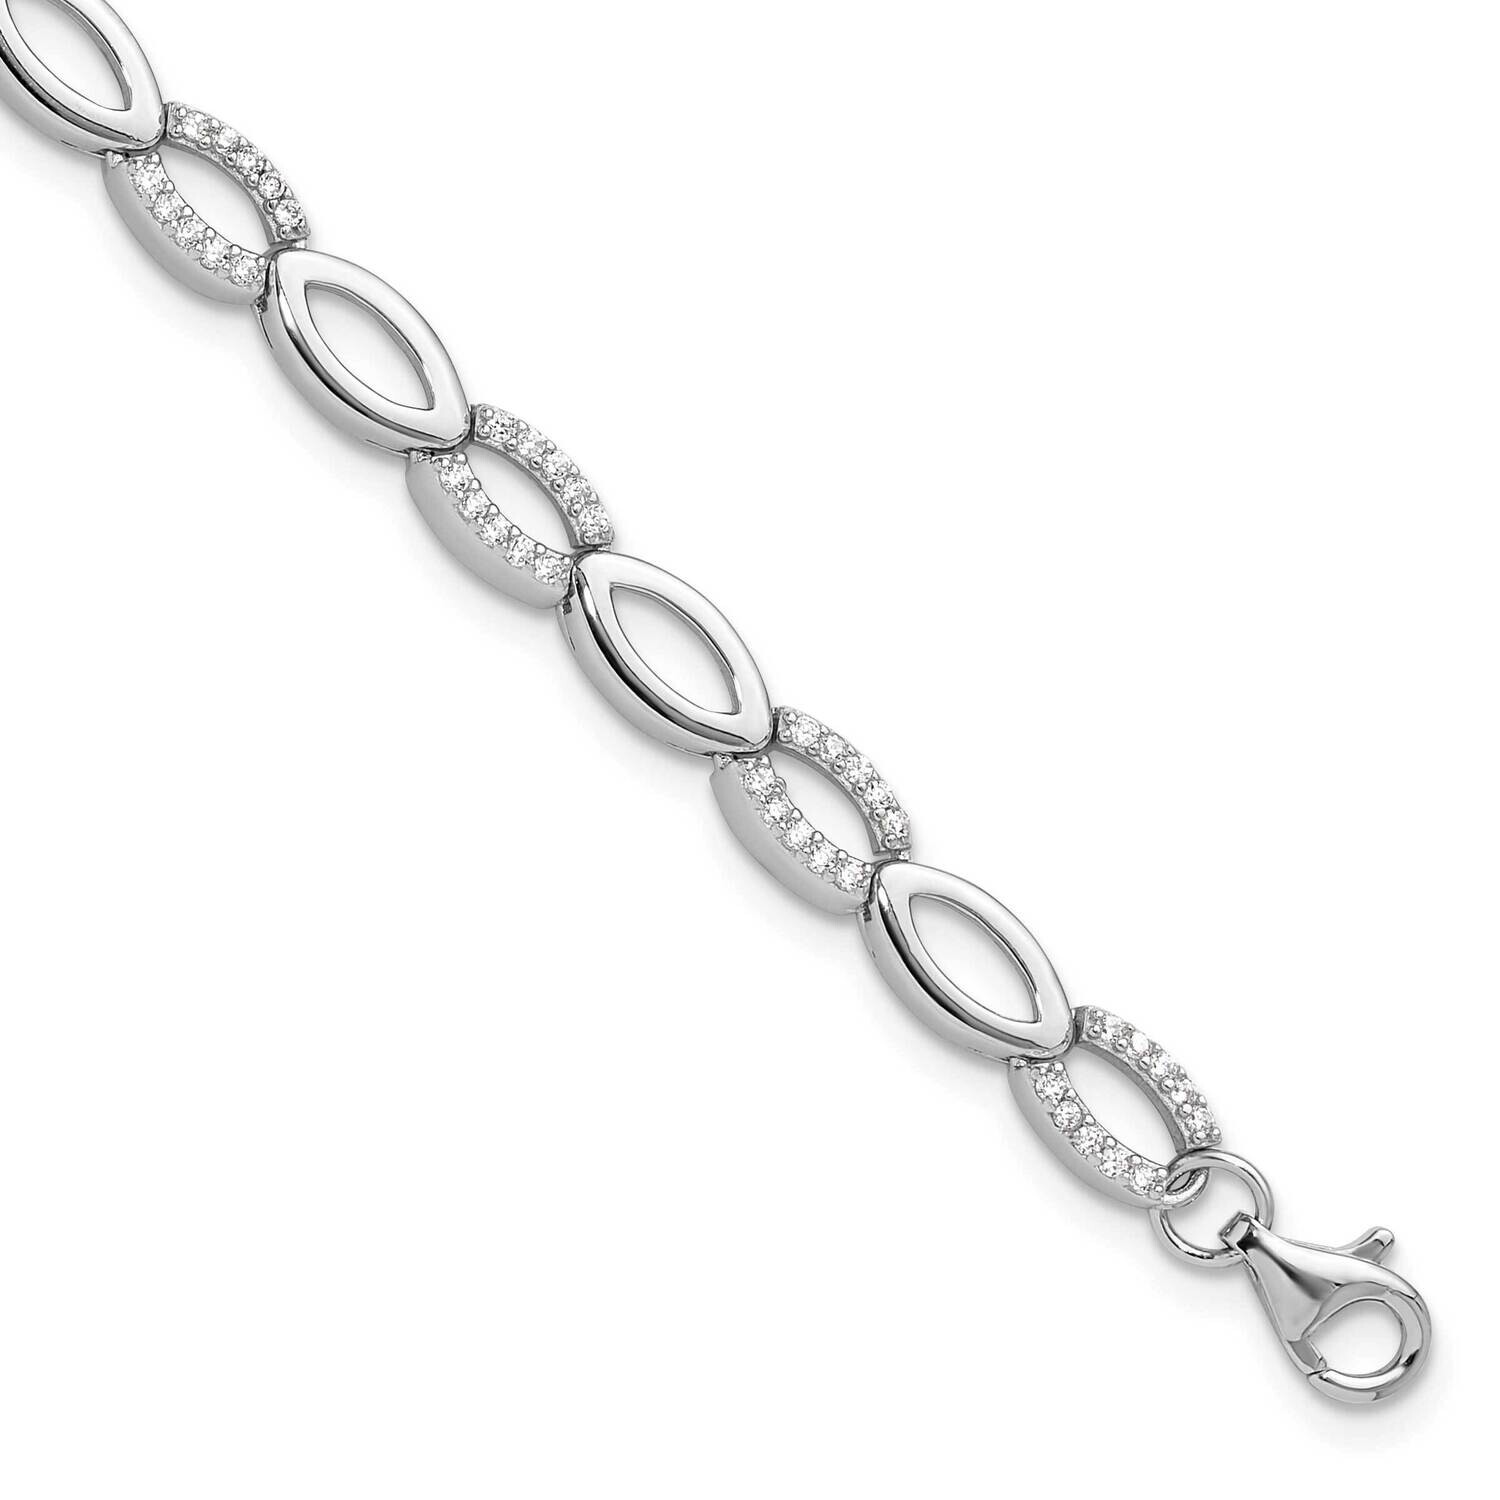 Cheryl M Brilliant-Cut CZ Marquise Shaped Link 7 Inch Bracelet 1 Inch Extender Sterling Silver Rhodium-Plated QCM1666-7